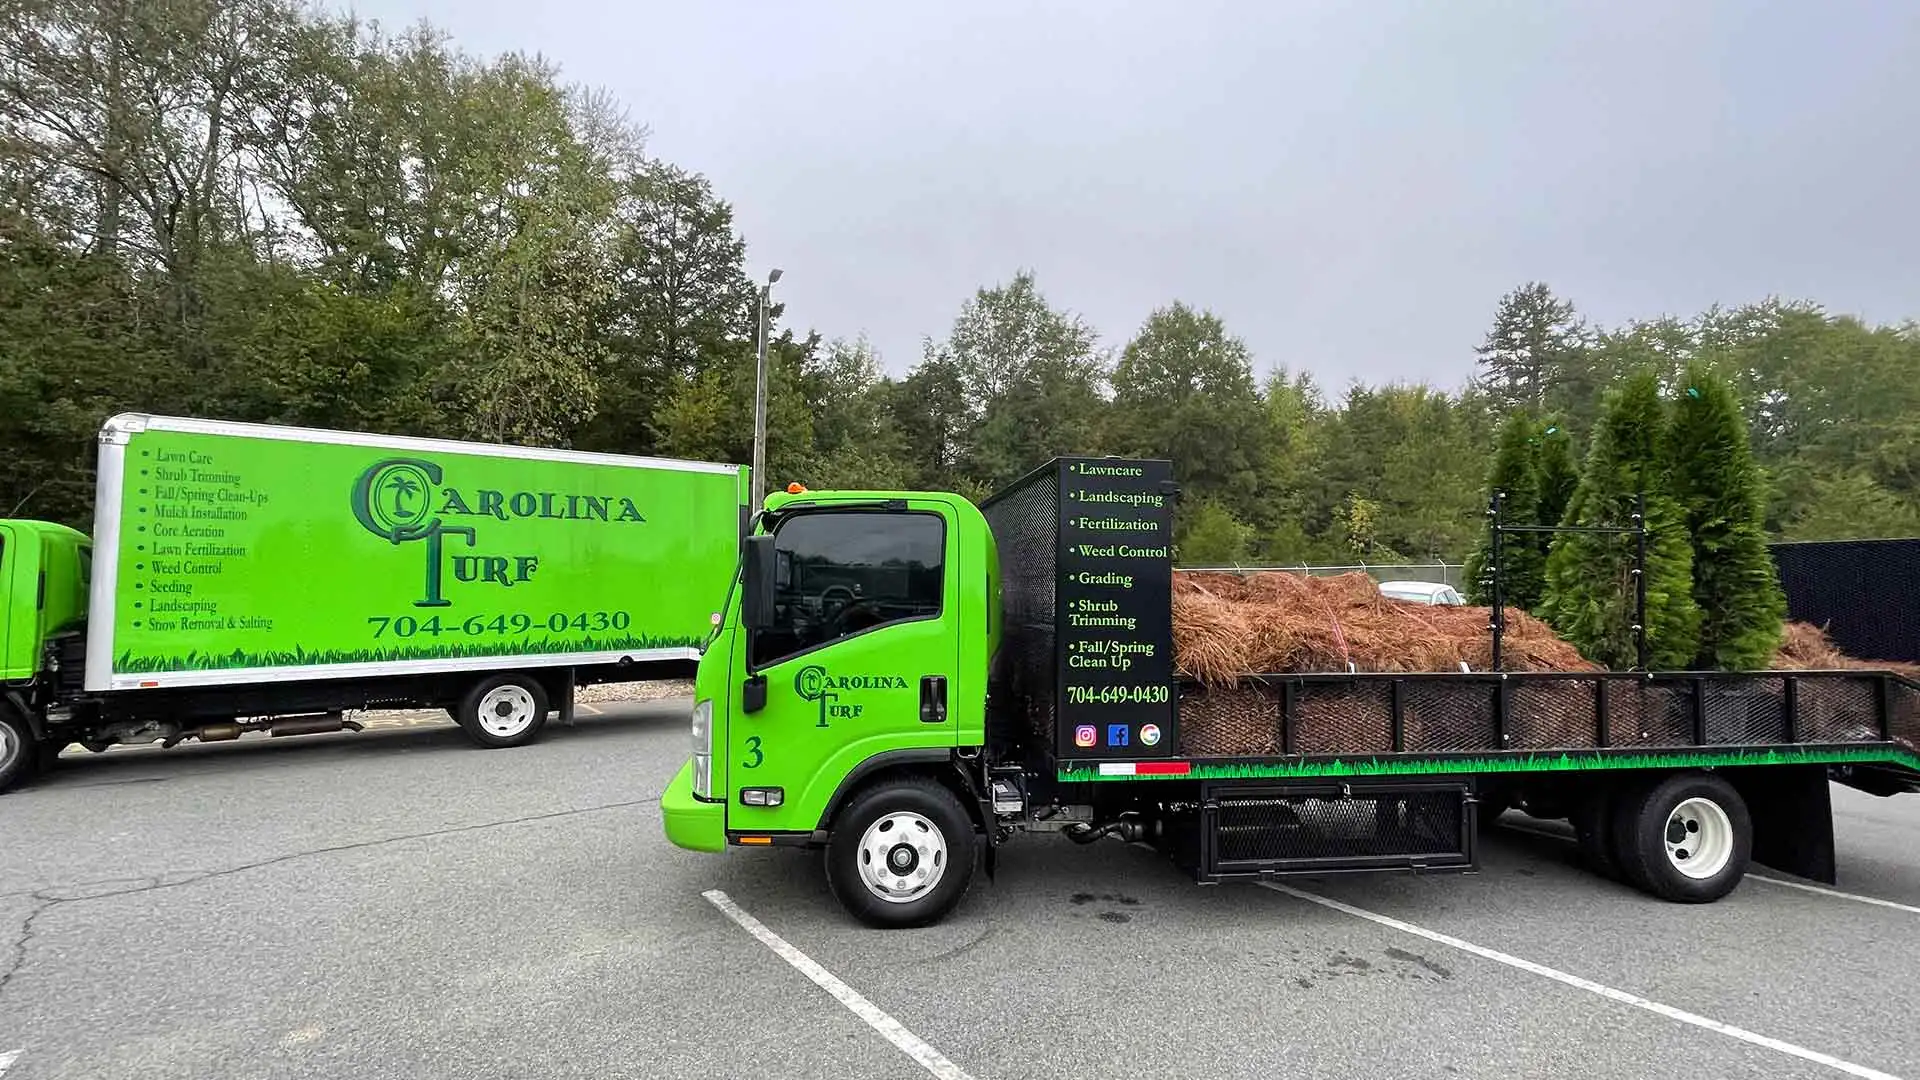 Two Carolina Turf Lawn and Landscape work trucks at a school with landscaping materials in Matthews, NC and surrounding areas.